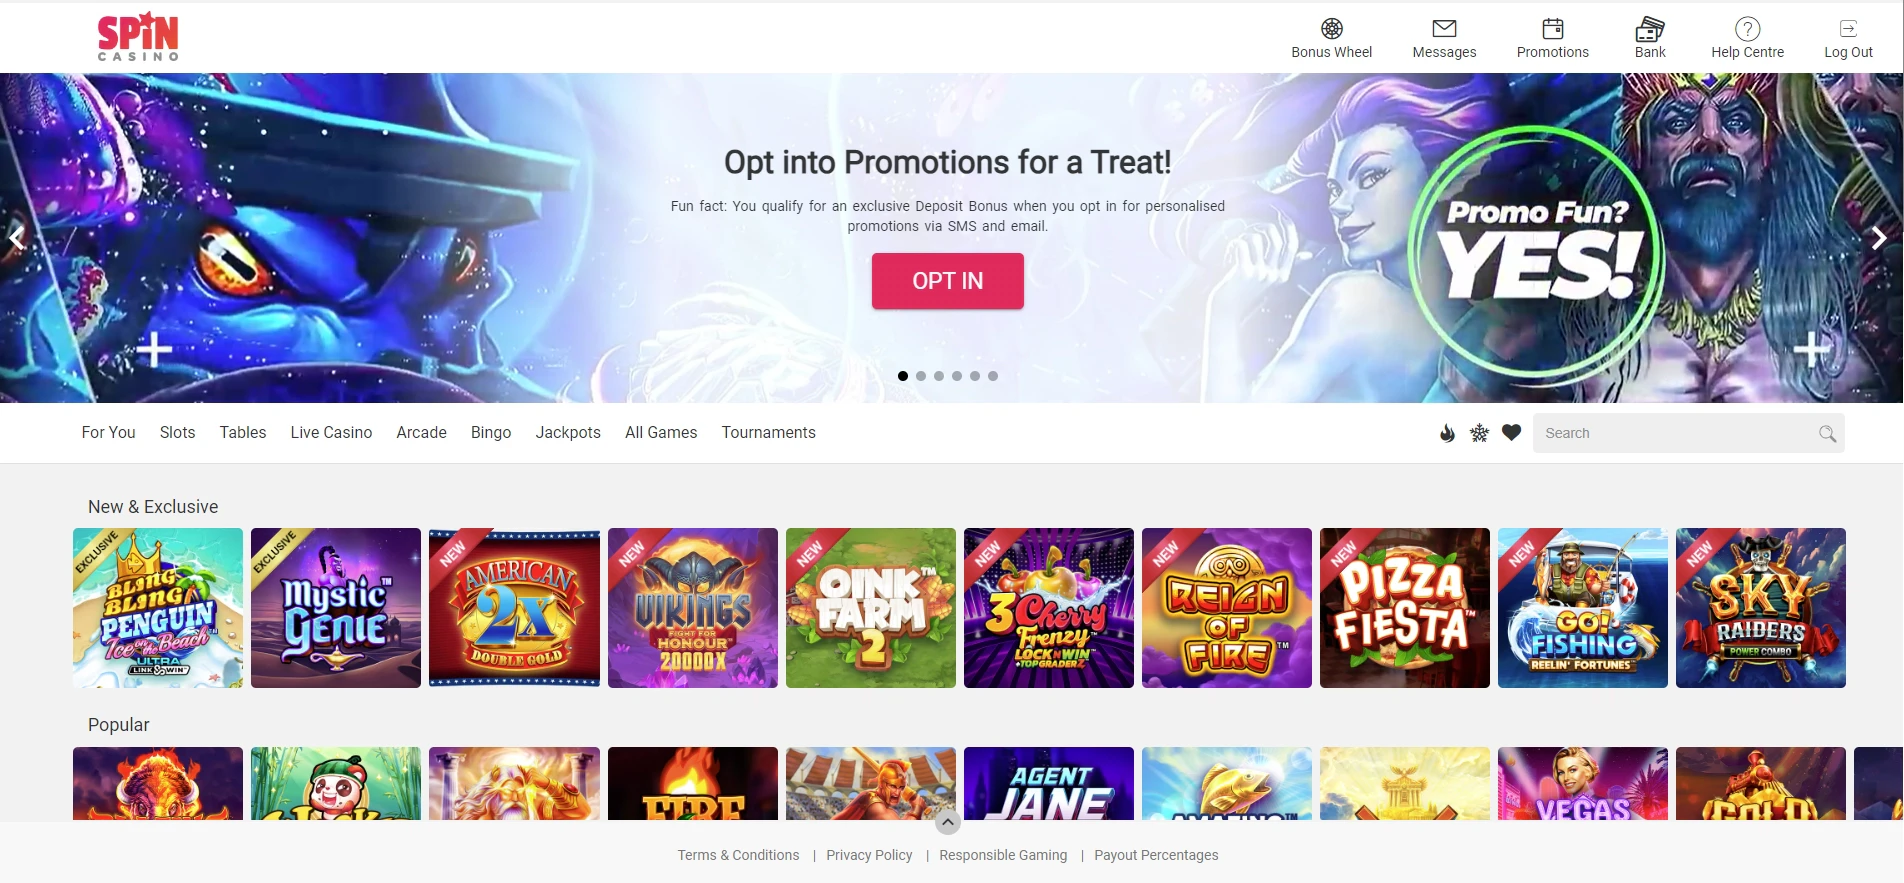 Spin Casino Home Page